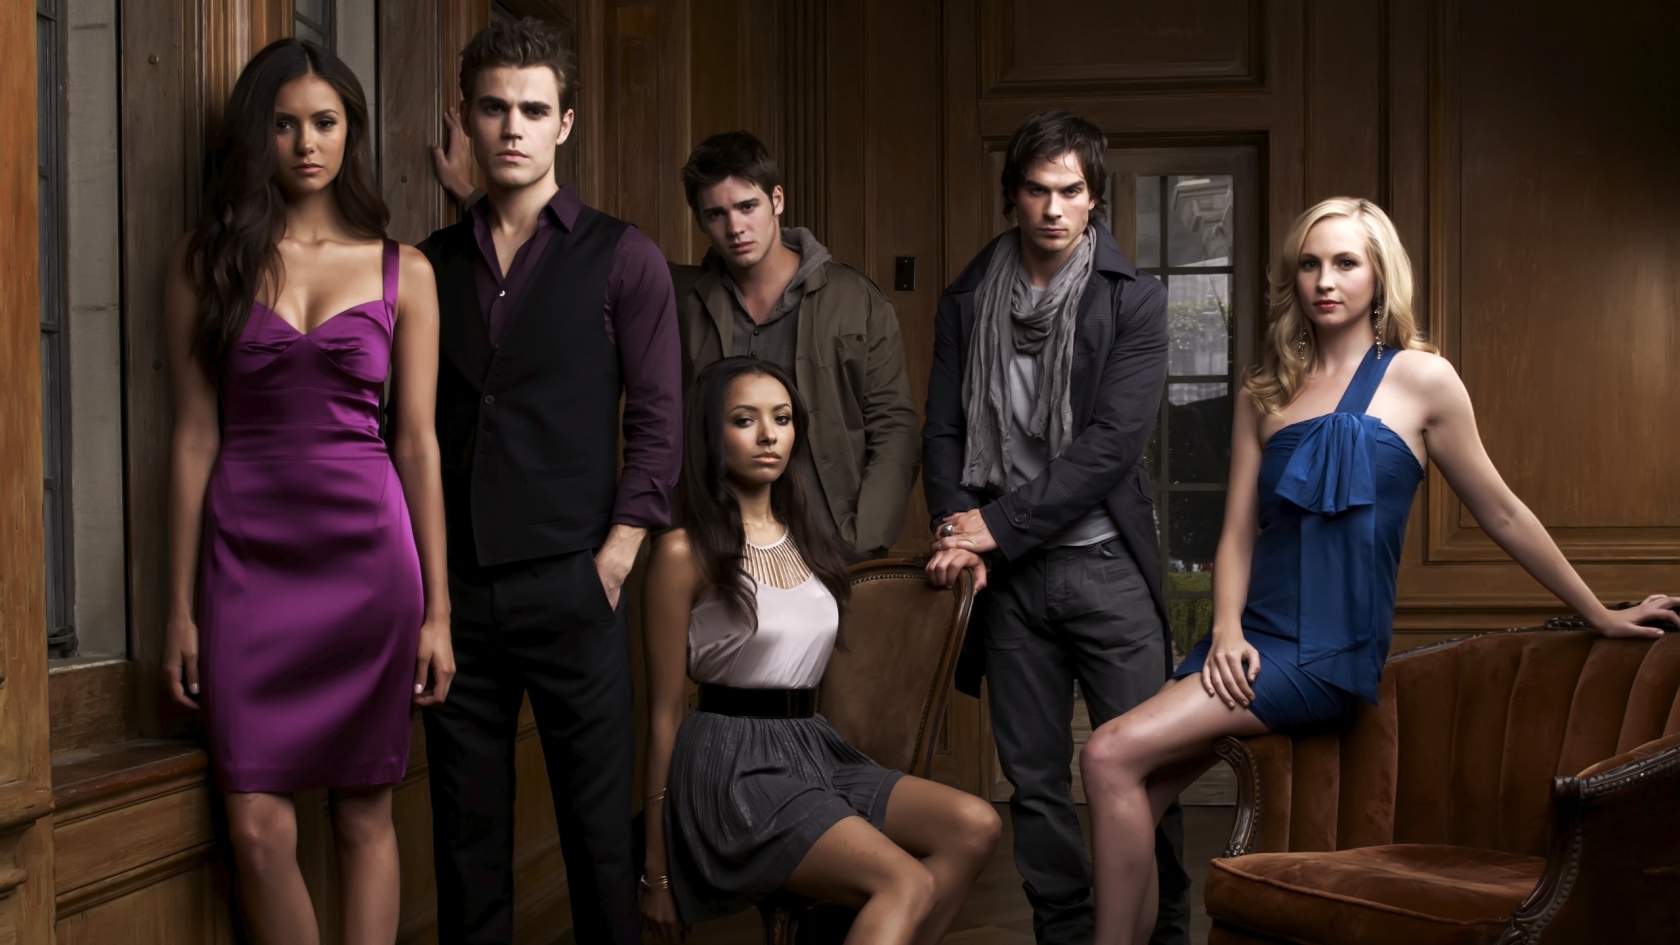 The Vampire Diaries Cast for 1680 x 945 HDTV resolution